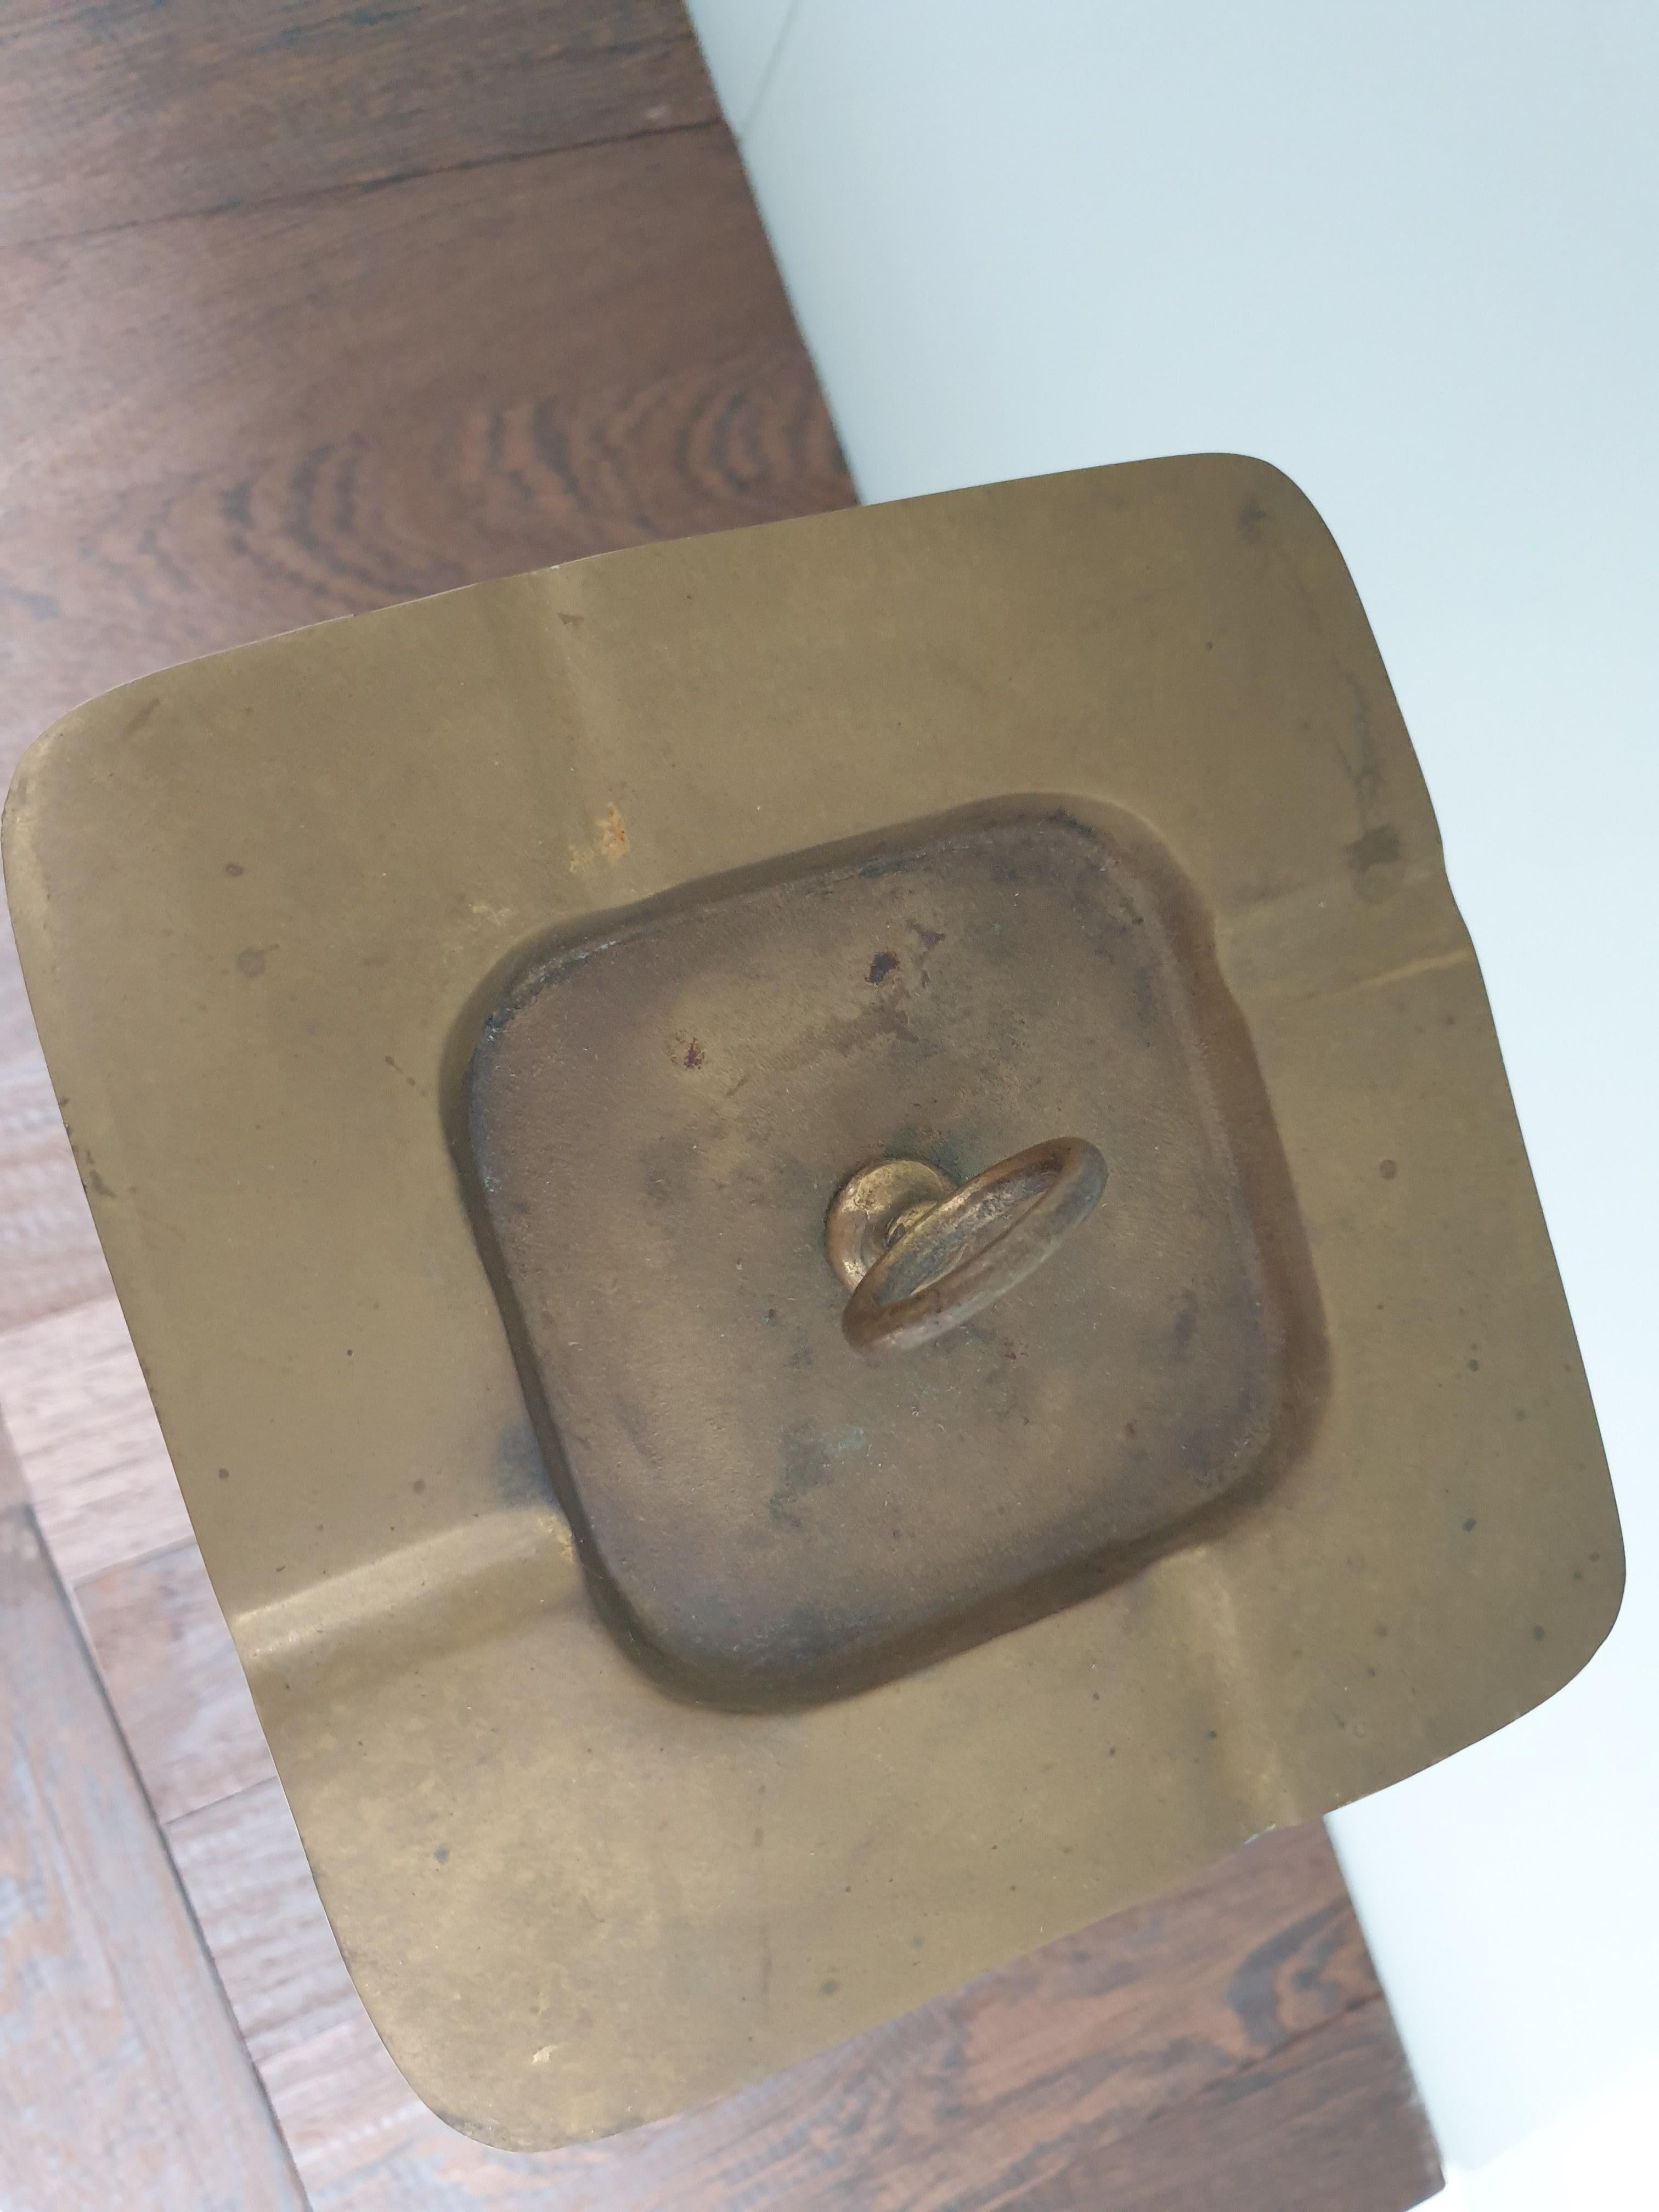 Mid-20th Century Stitched leather ashtray on stand by Jacques adnet.